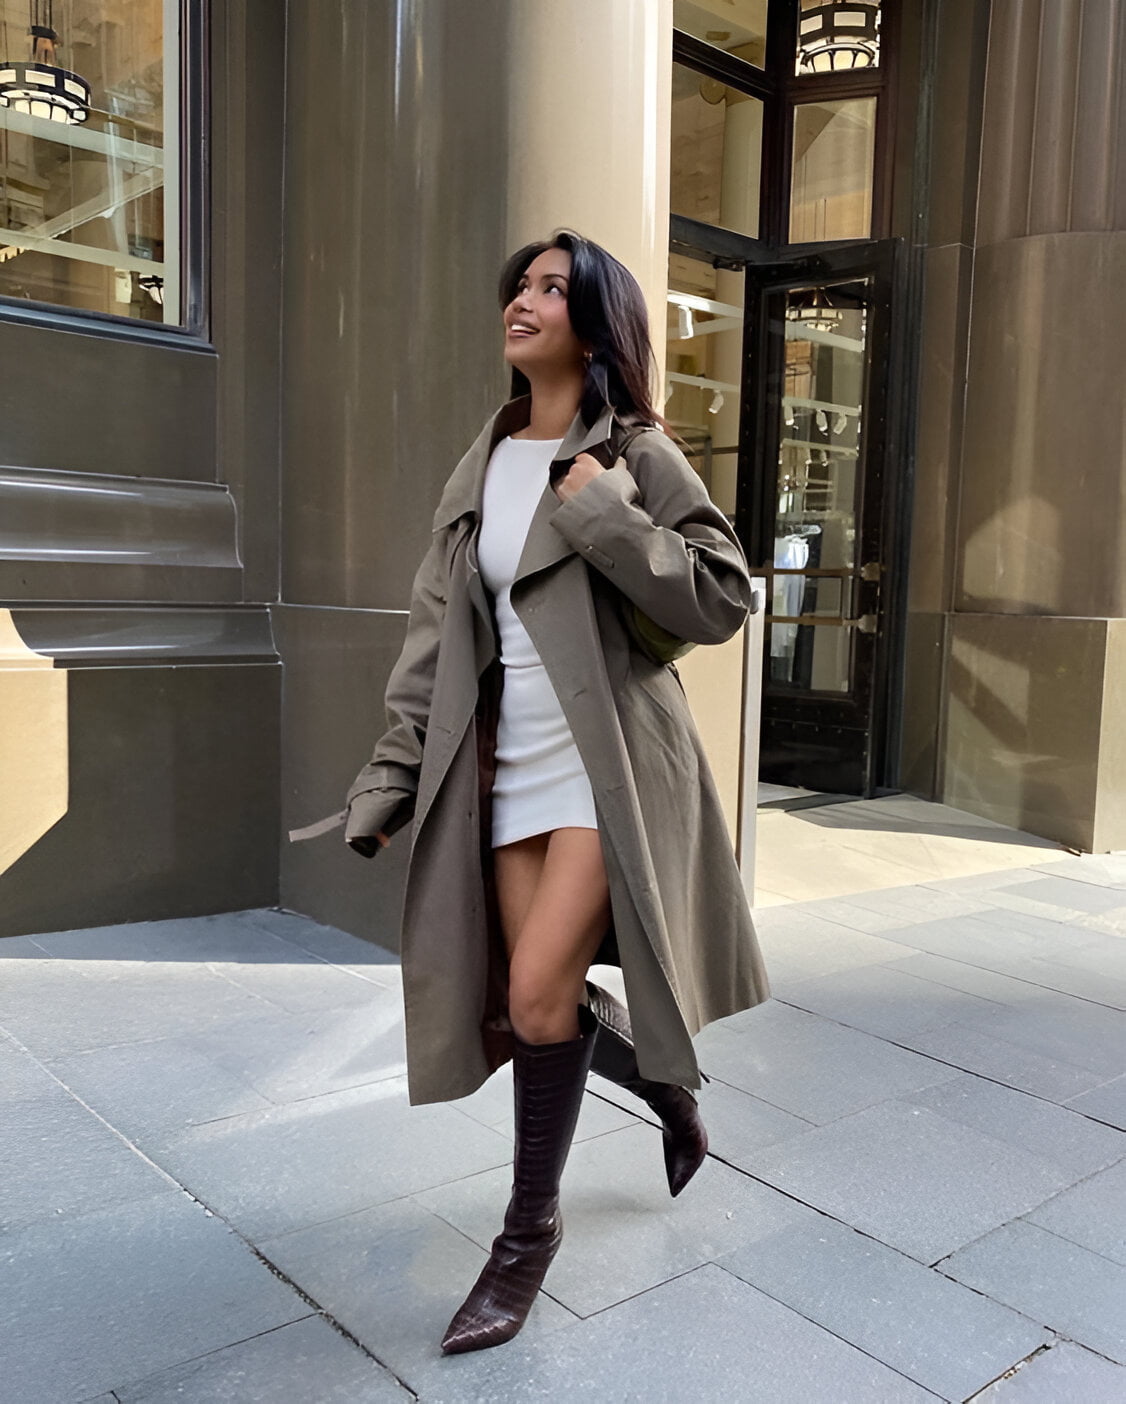 Long Trench Coat With Short Dress